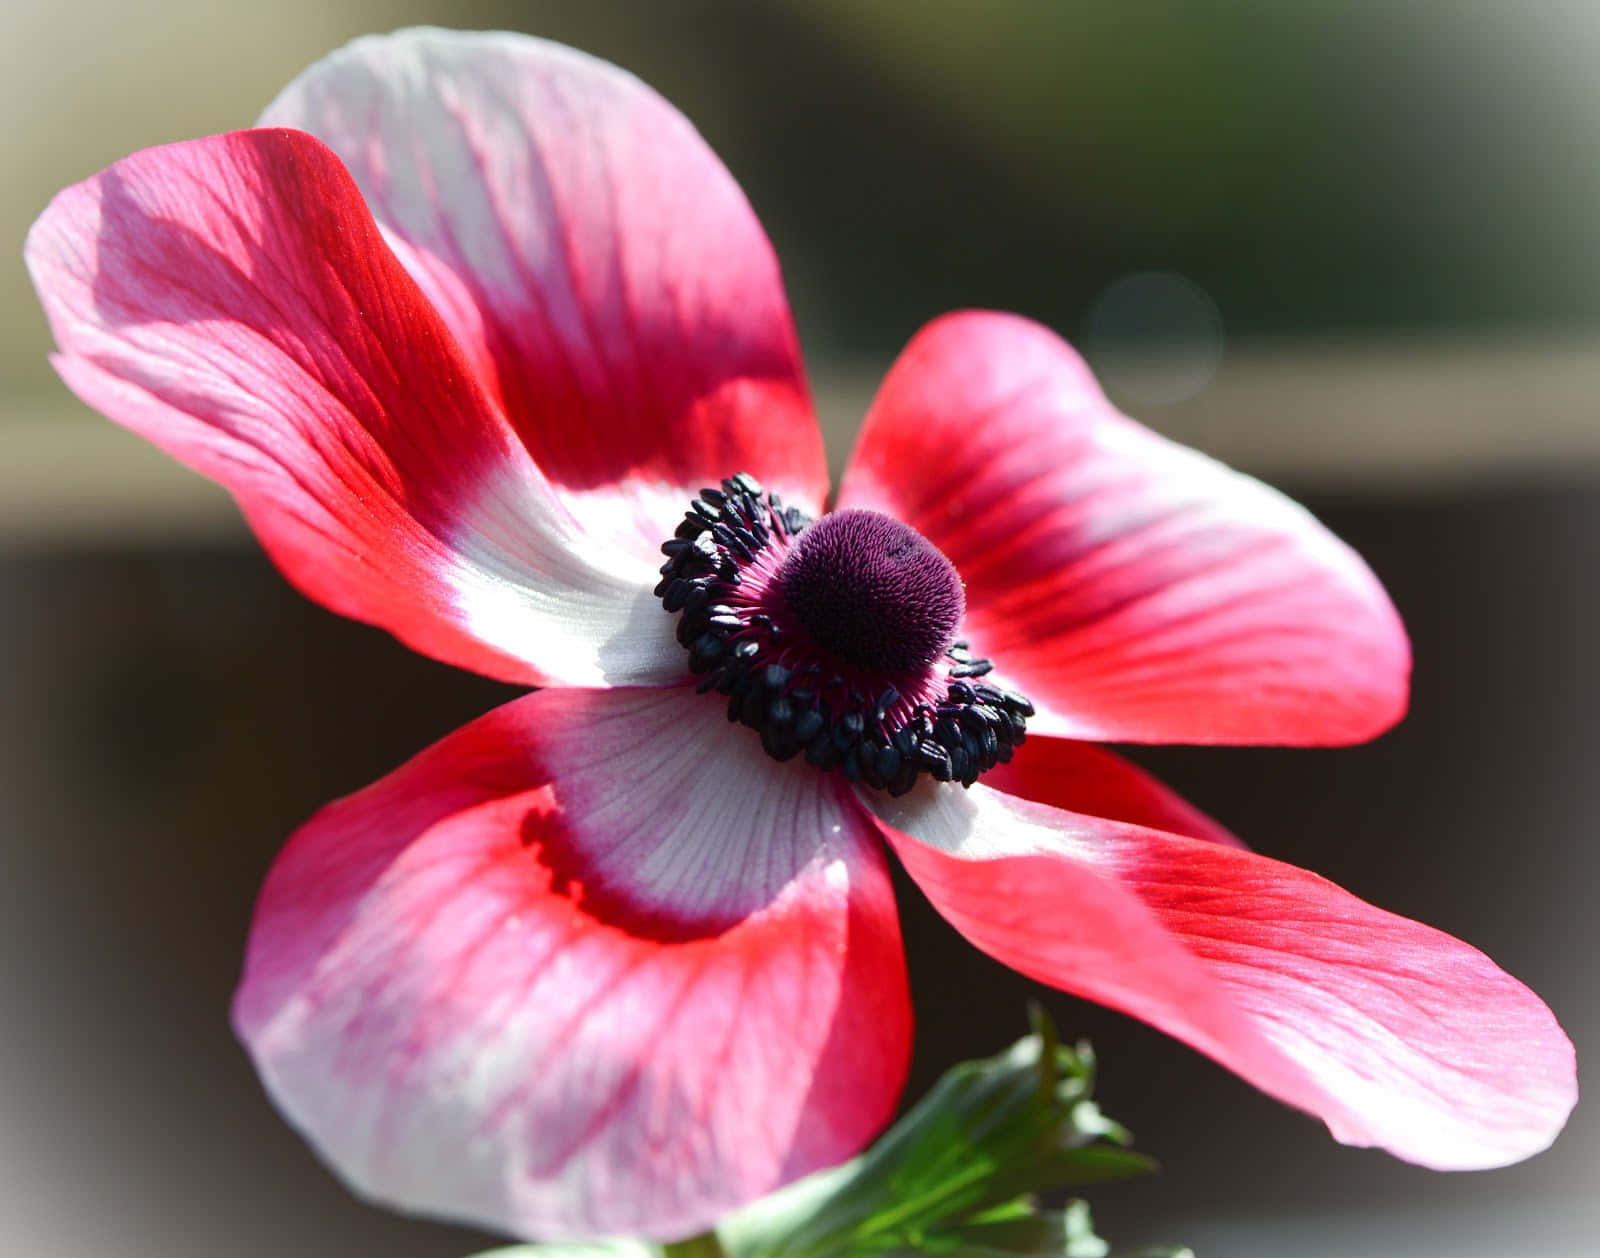 A beautiful anemone flower in its natural sunlight setting.